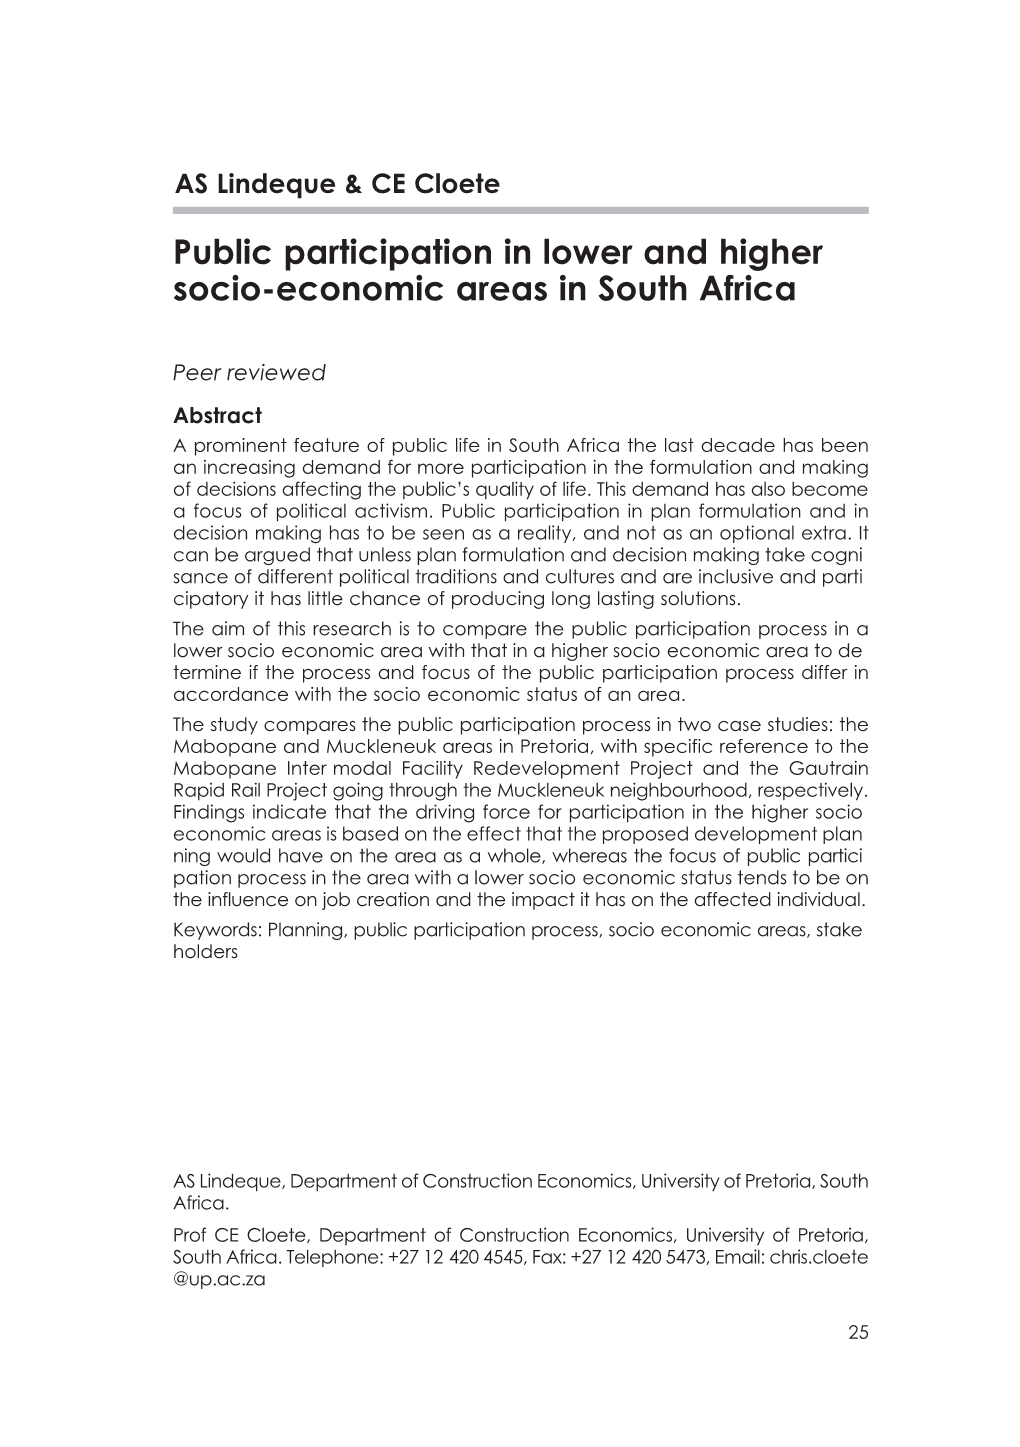 Public Participation in Lower and Higher Socio-Economic Areas in South Africa